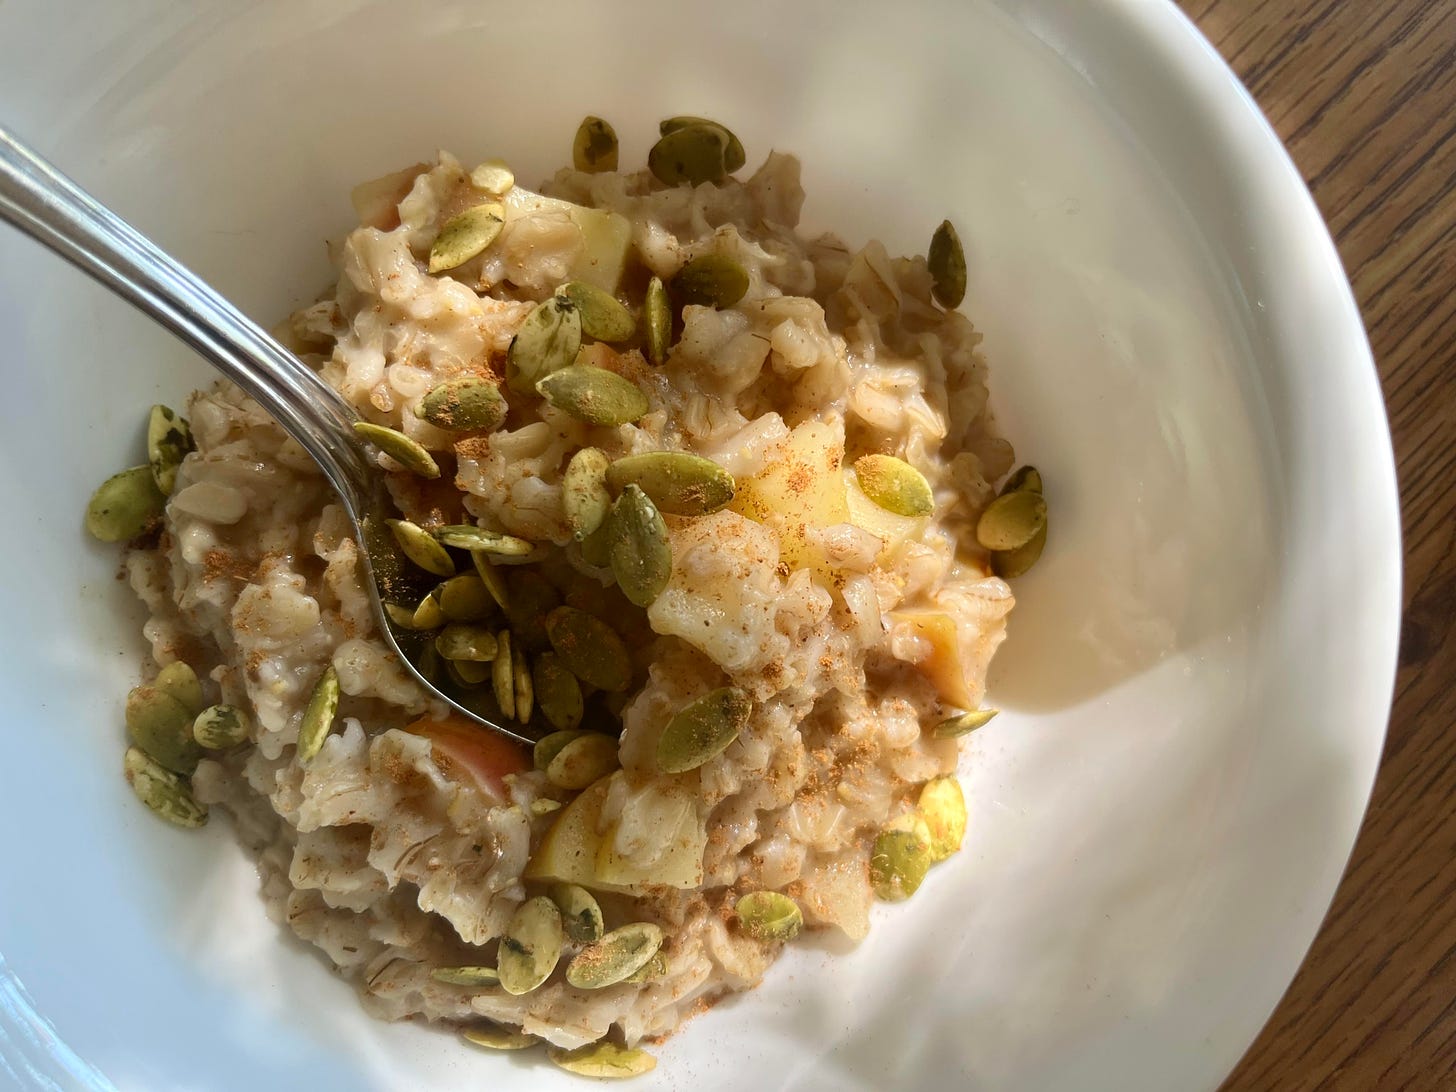 A close-up image of a bowl of oatmeal with cinnamon and pumpkin seeds sprinkled on top